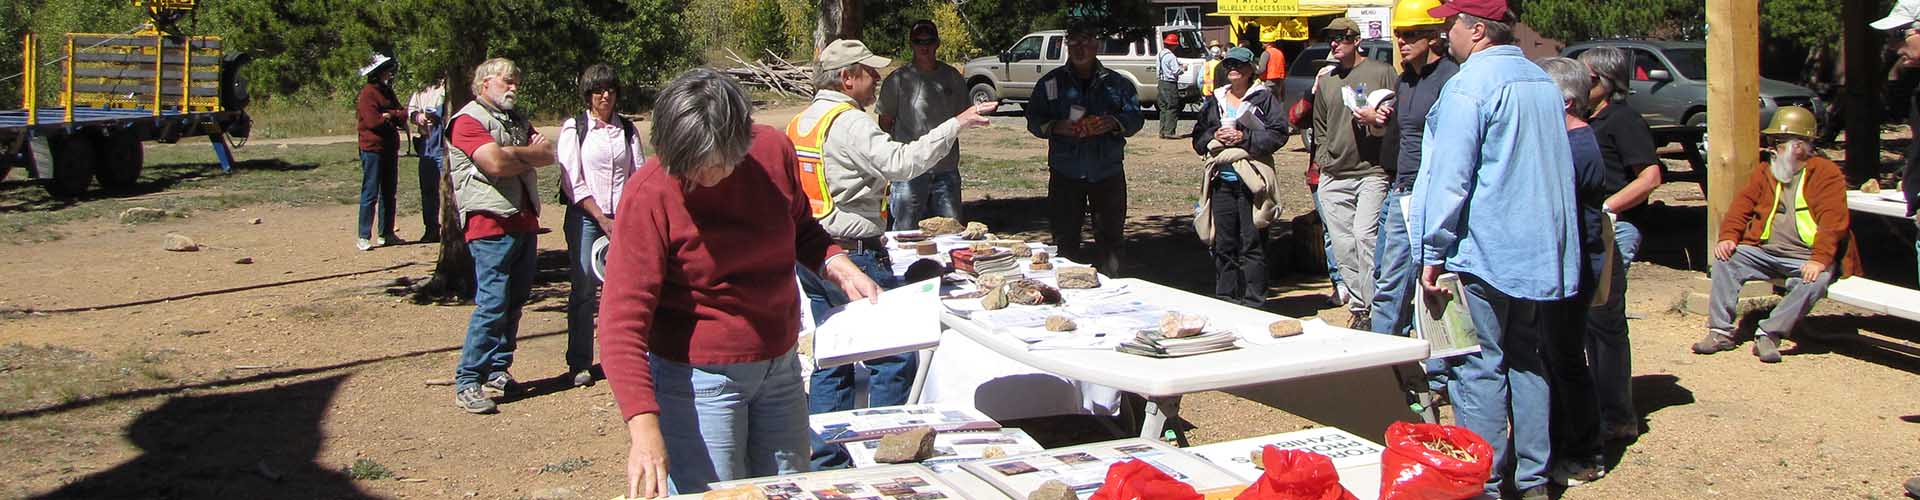 Area residents attend Forest Health event in Boulder County foothills